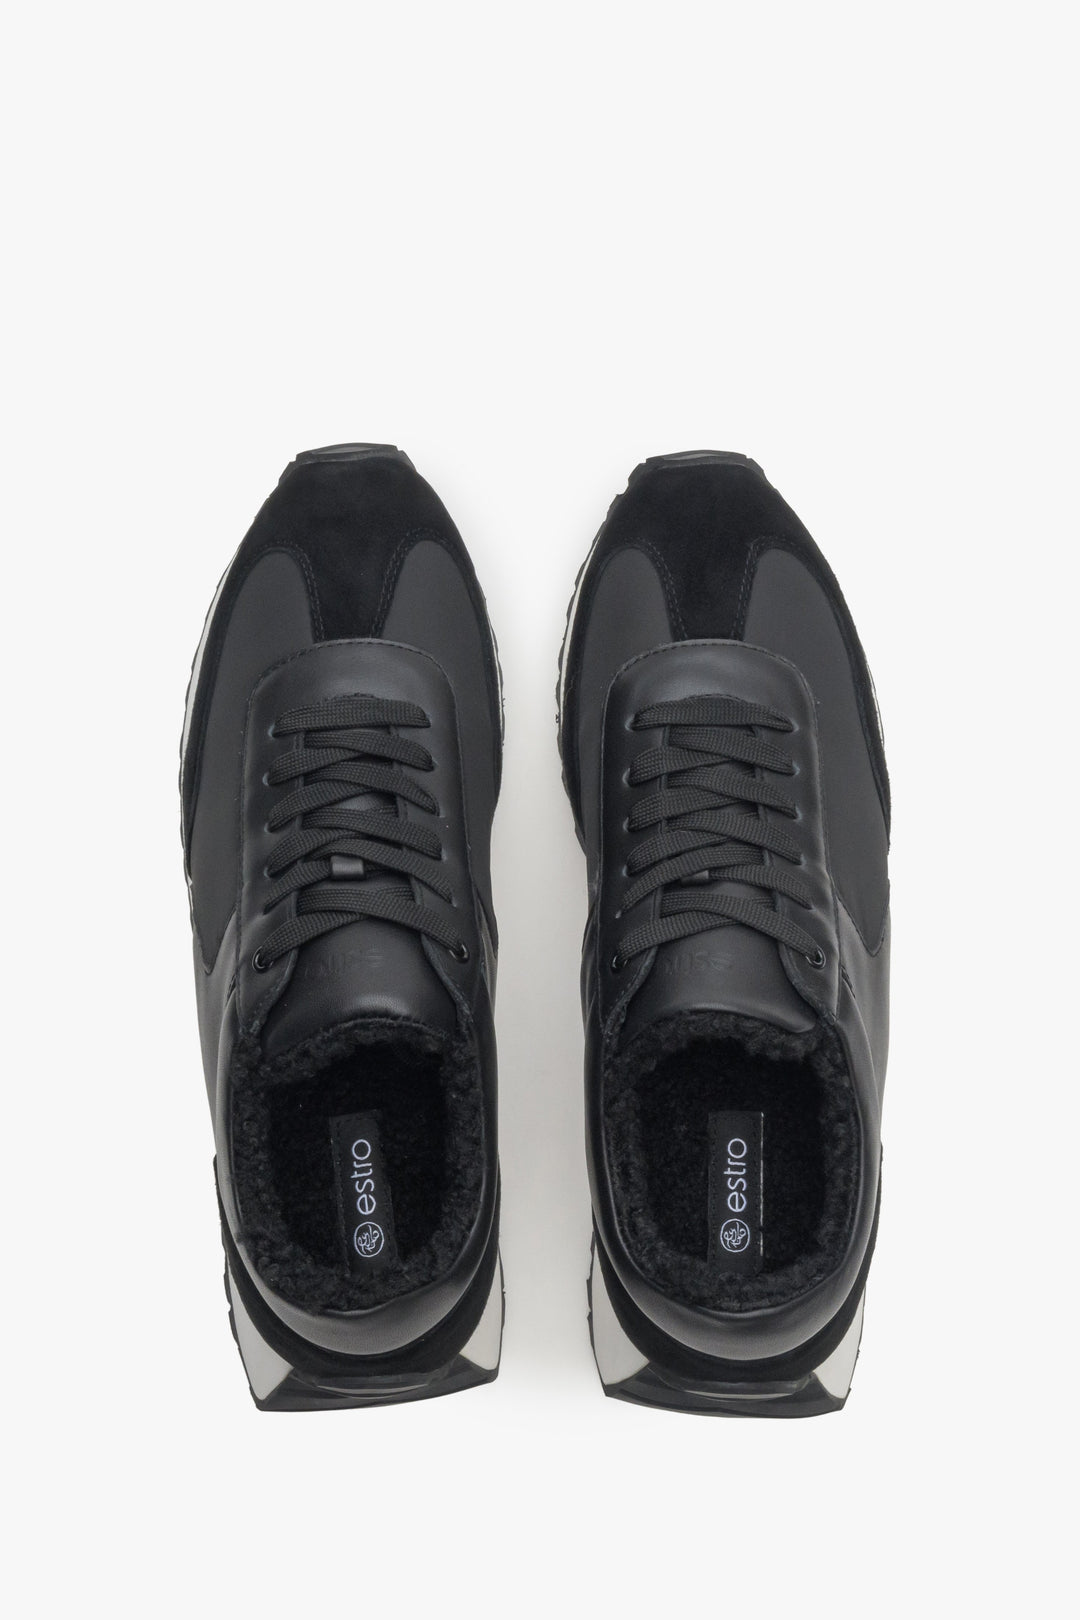 Women's winter sneakers in black made of leather and velvet - top view presentation of the model.